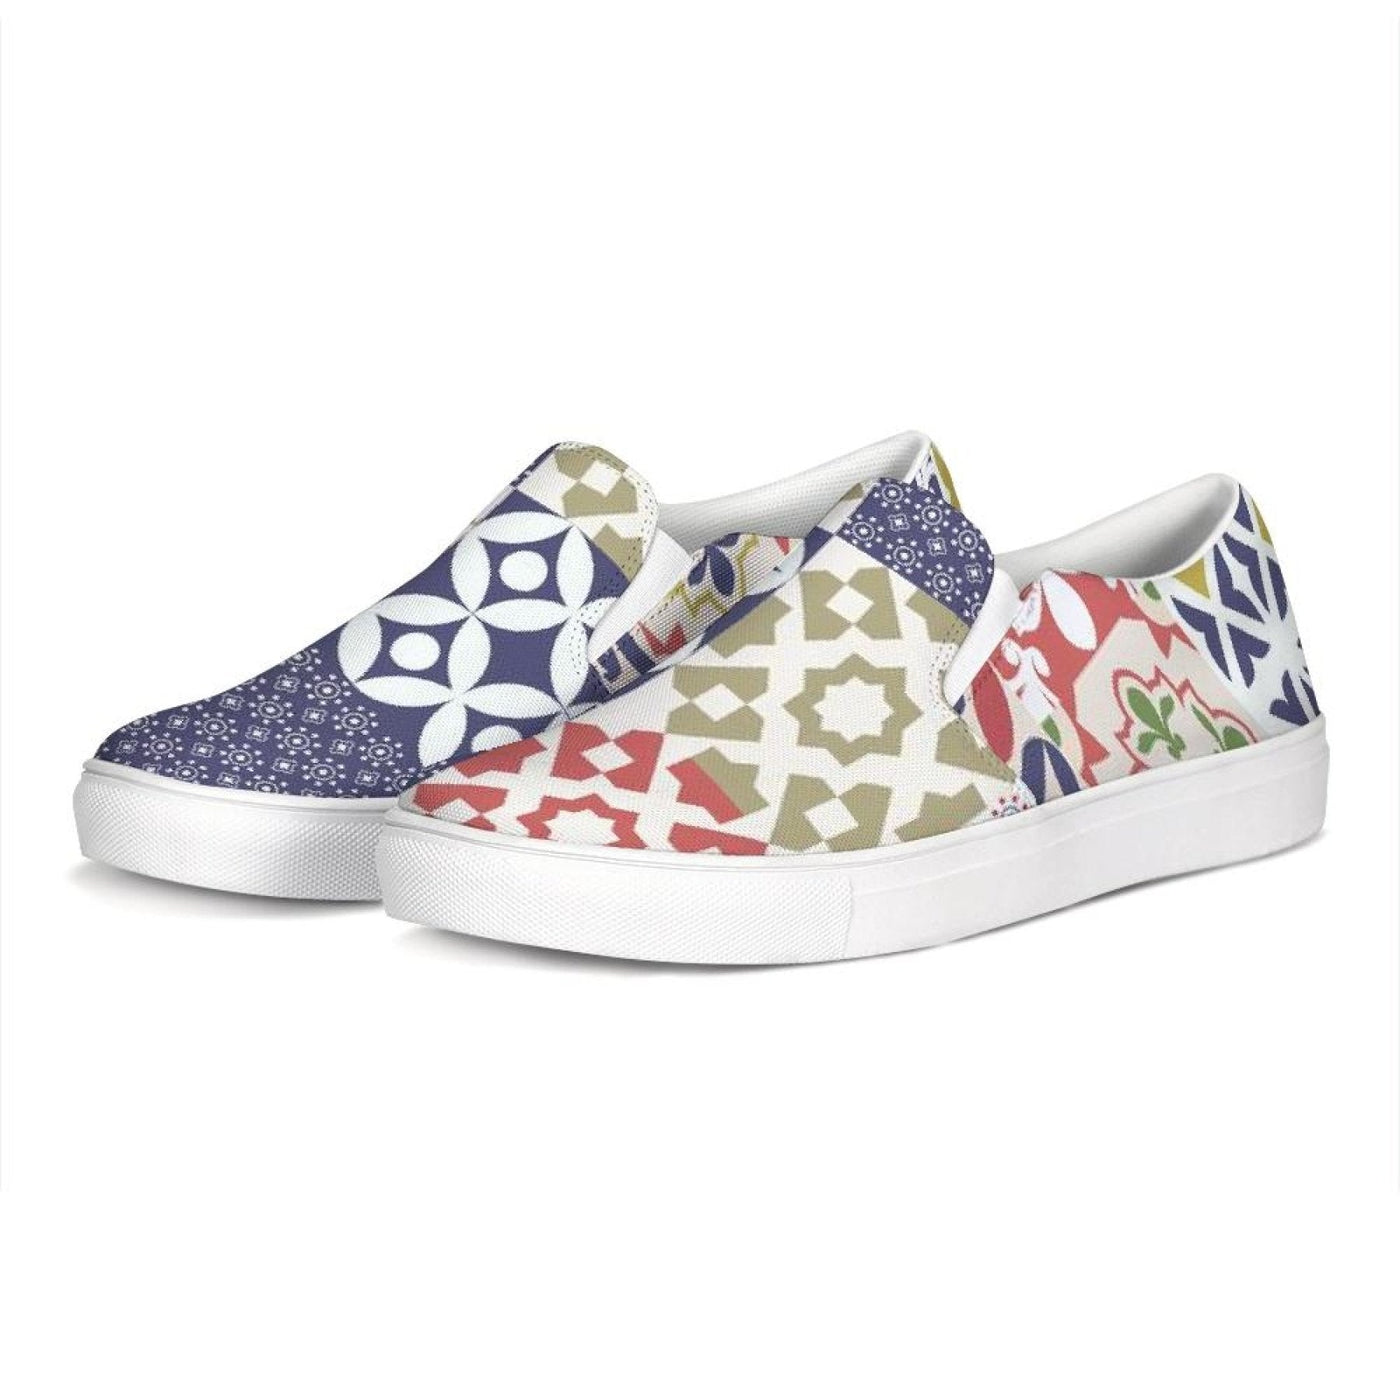 Womens Sneakers Multicolor Patch Style Low Top Slip-on Canvas Shoes - Womens |